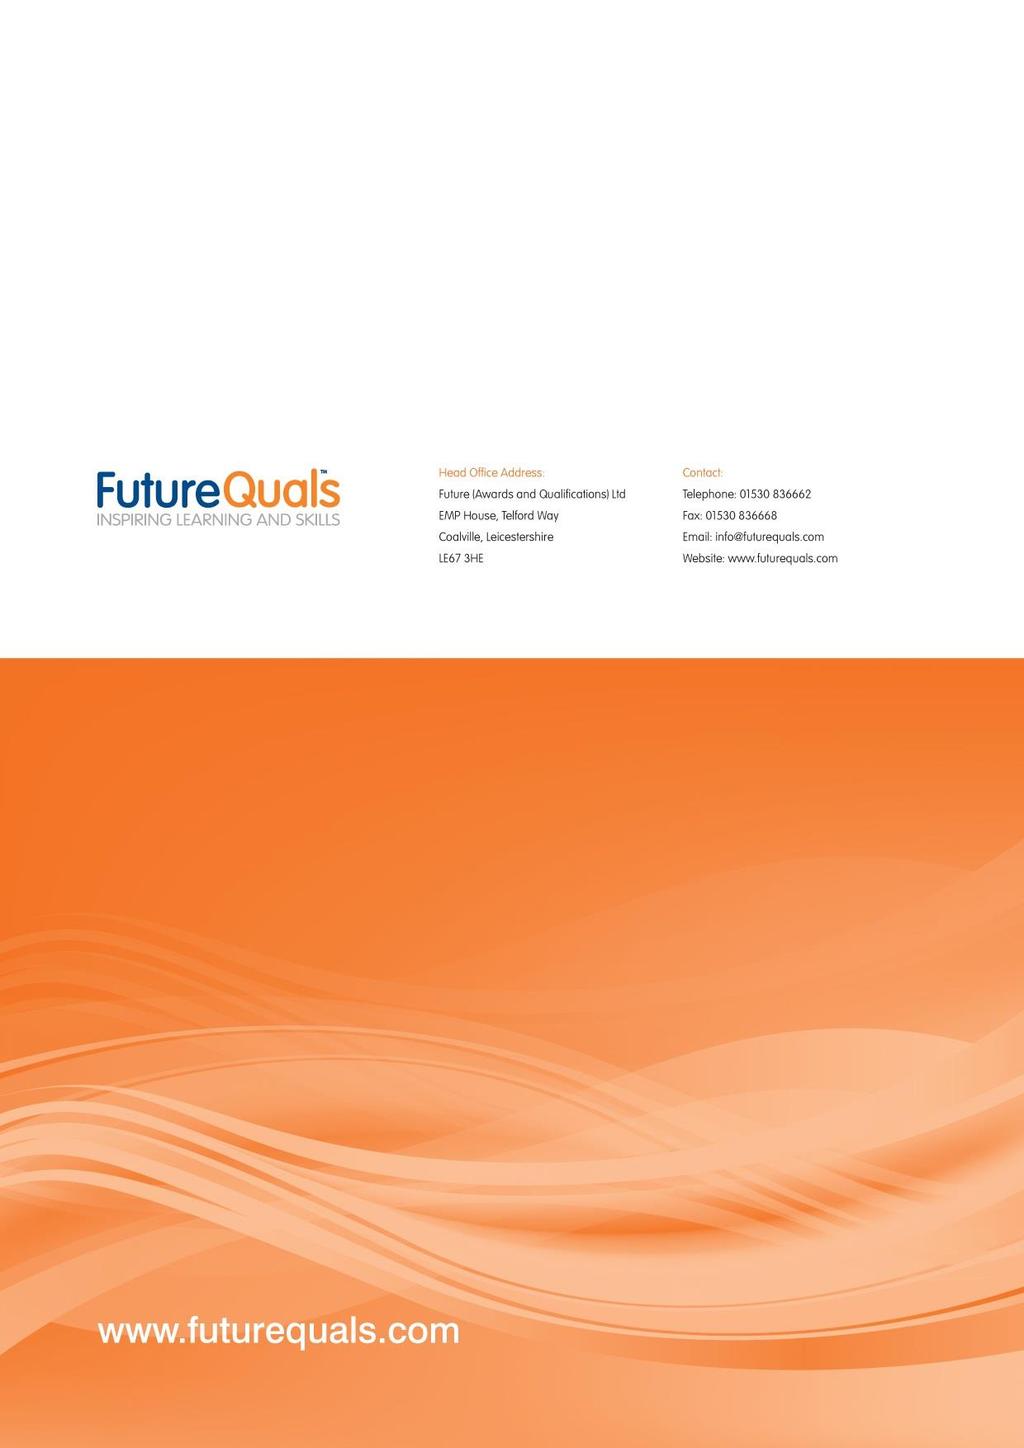 Future (Awards and Qualifications) Ltd